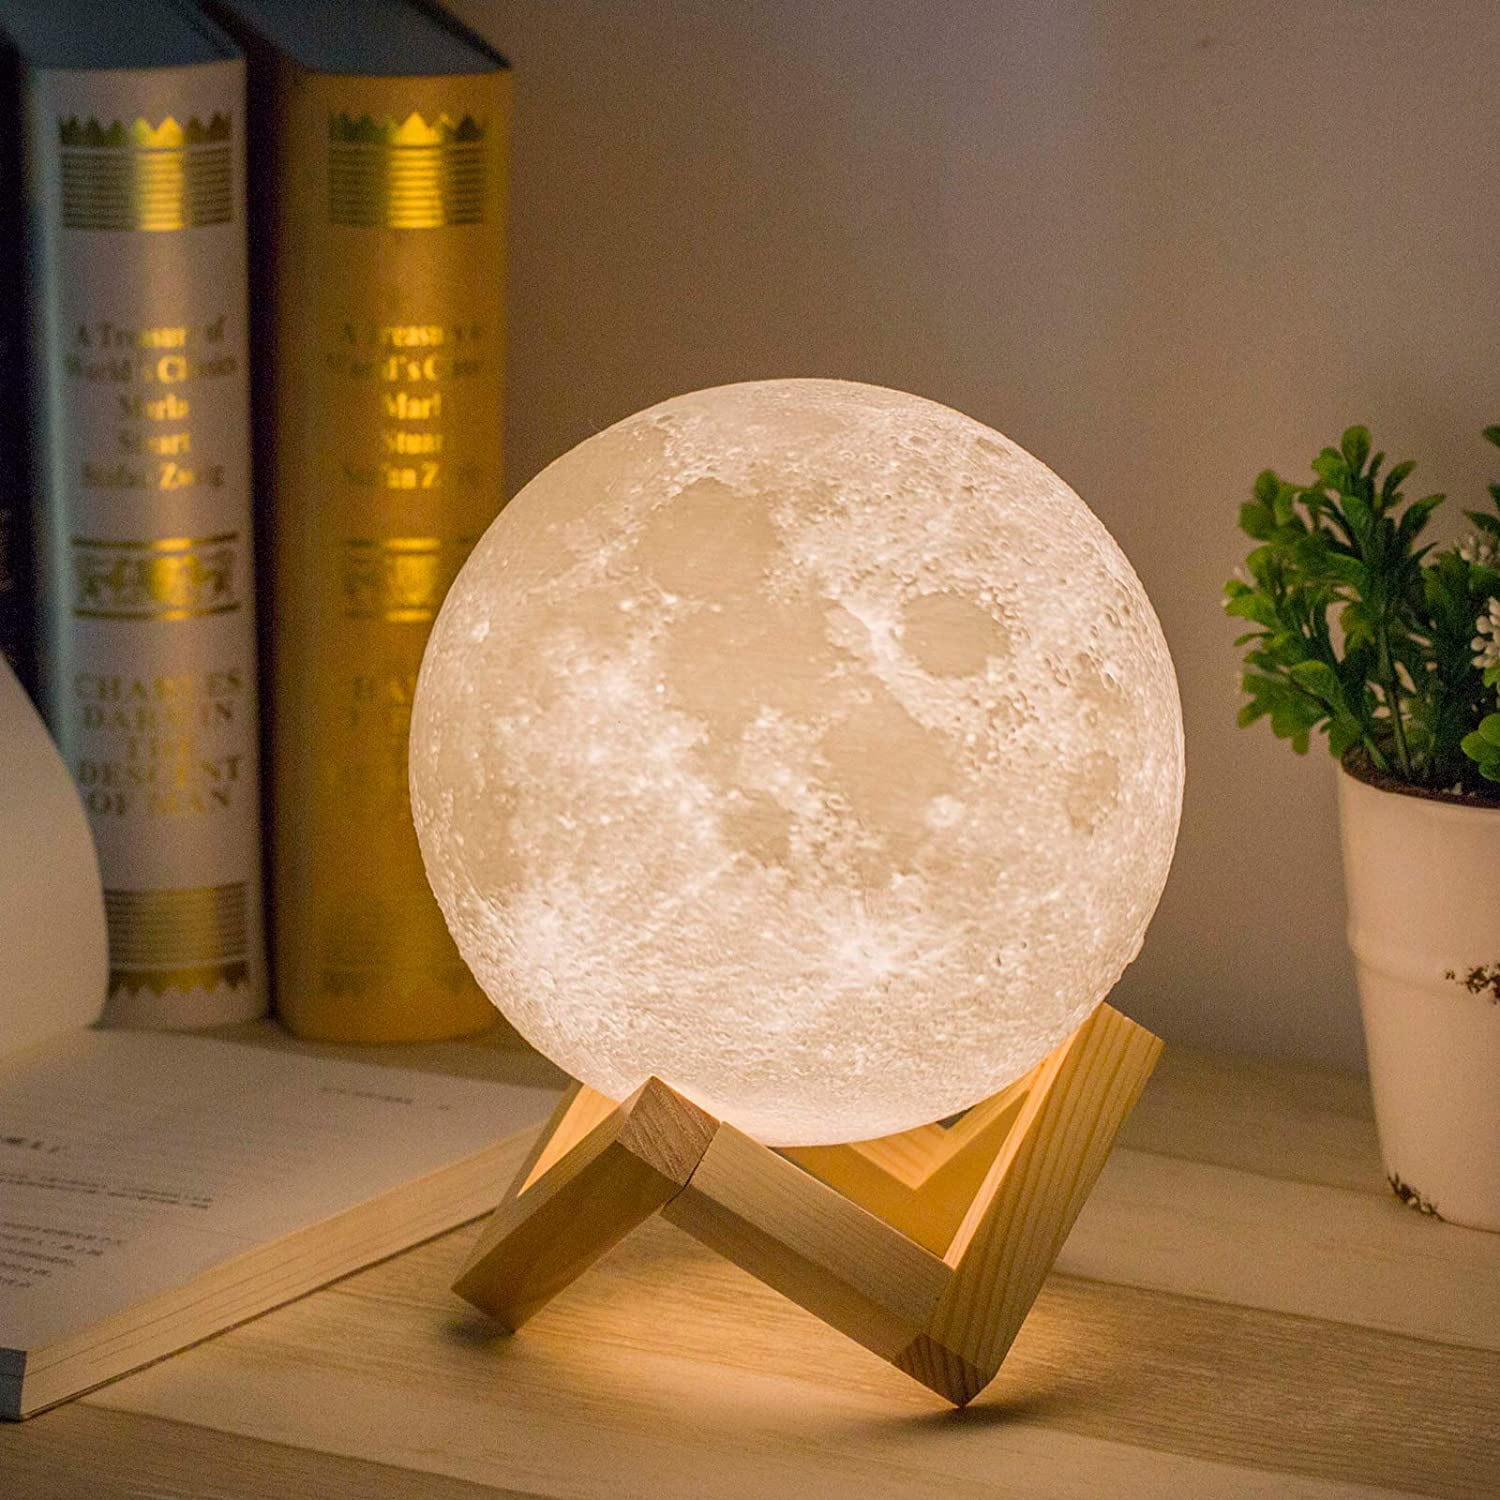 D Moon Lamp 3.5 Inch 3D Printing Lunar Lamp Night Light With White Hand Stand A 